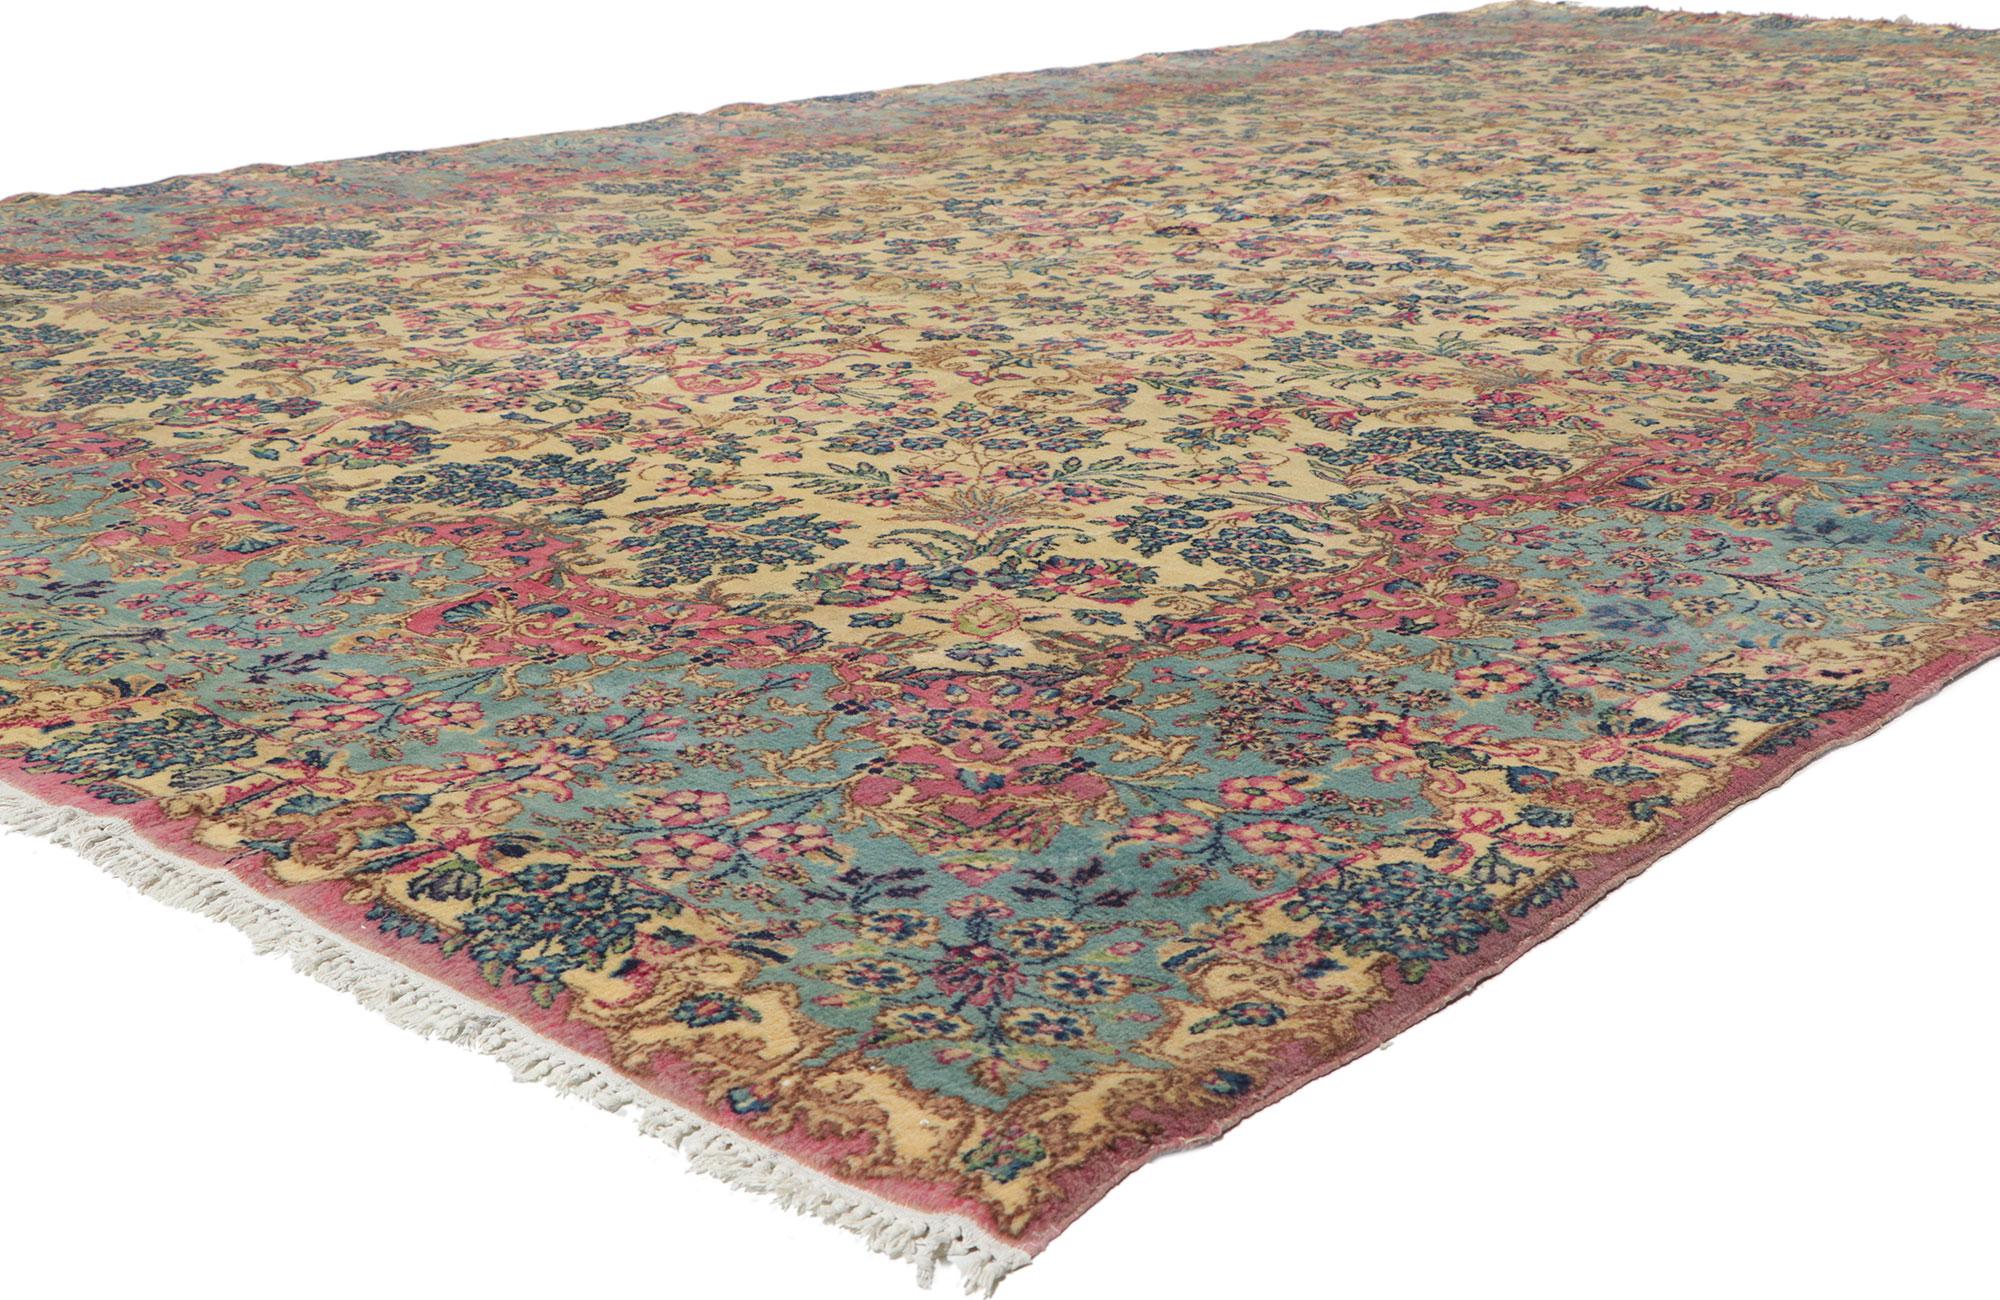 77651 Antique Persian Kerman Rug, 09'07 x 16'03. From the enchanting heart of south-central Iran emerges the legacy of Kerman rugs, woven into existence within the storied city of Kerman. This bustling hub of weaving stands as a testament to the